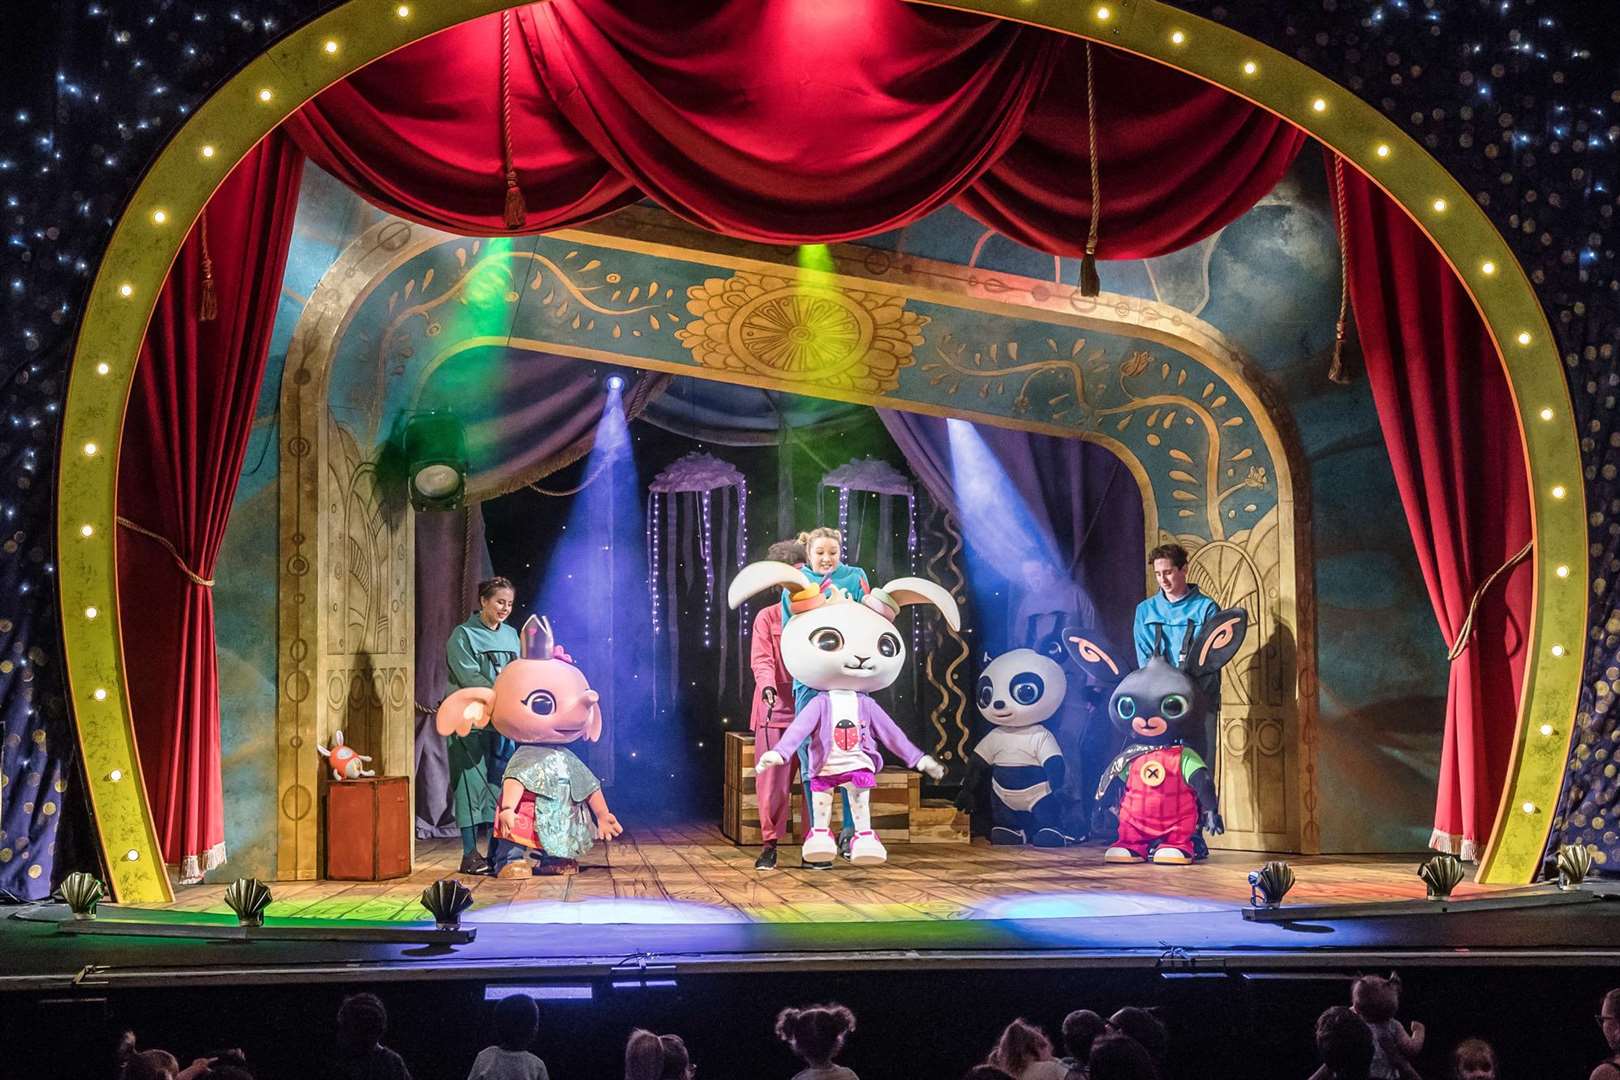 Puppetry, music, story telling and songs are all promised in this magical theatre performance